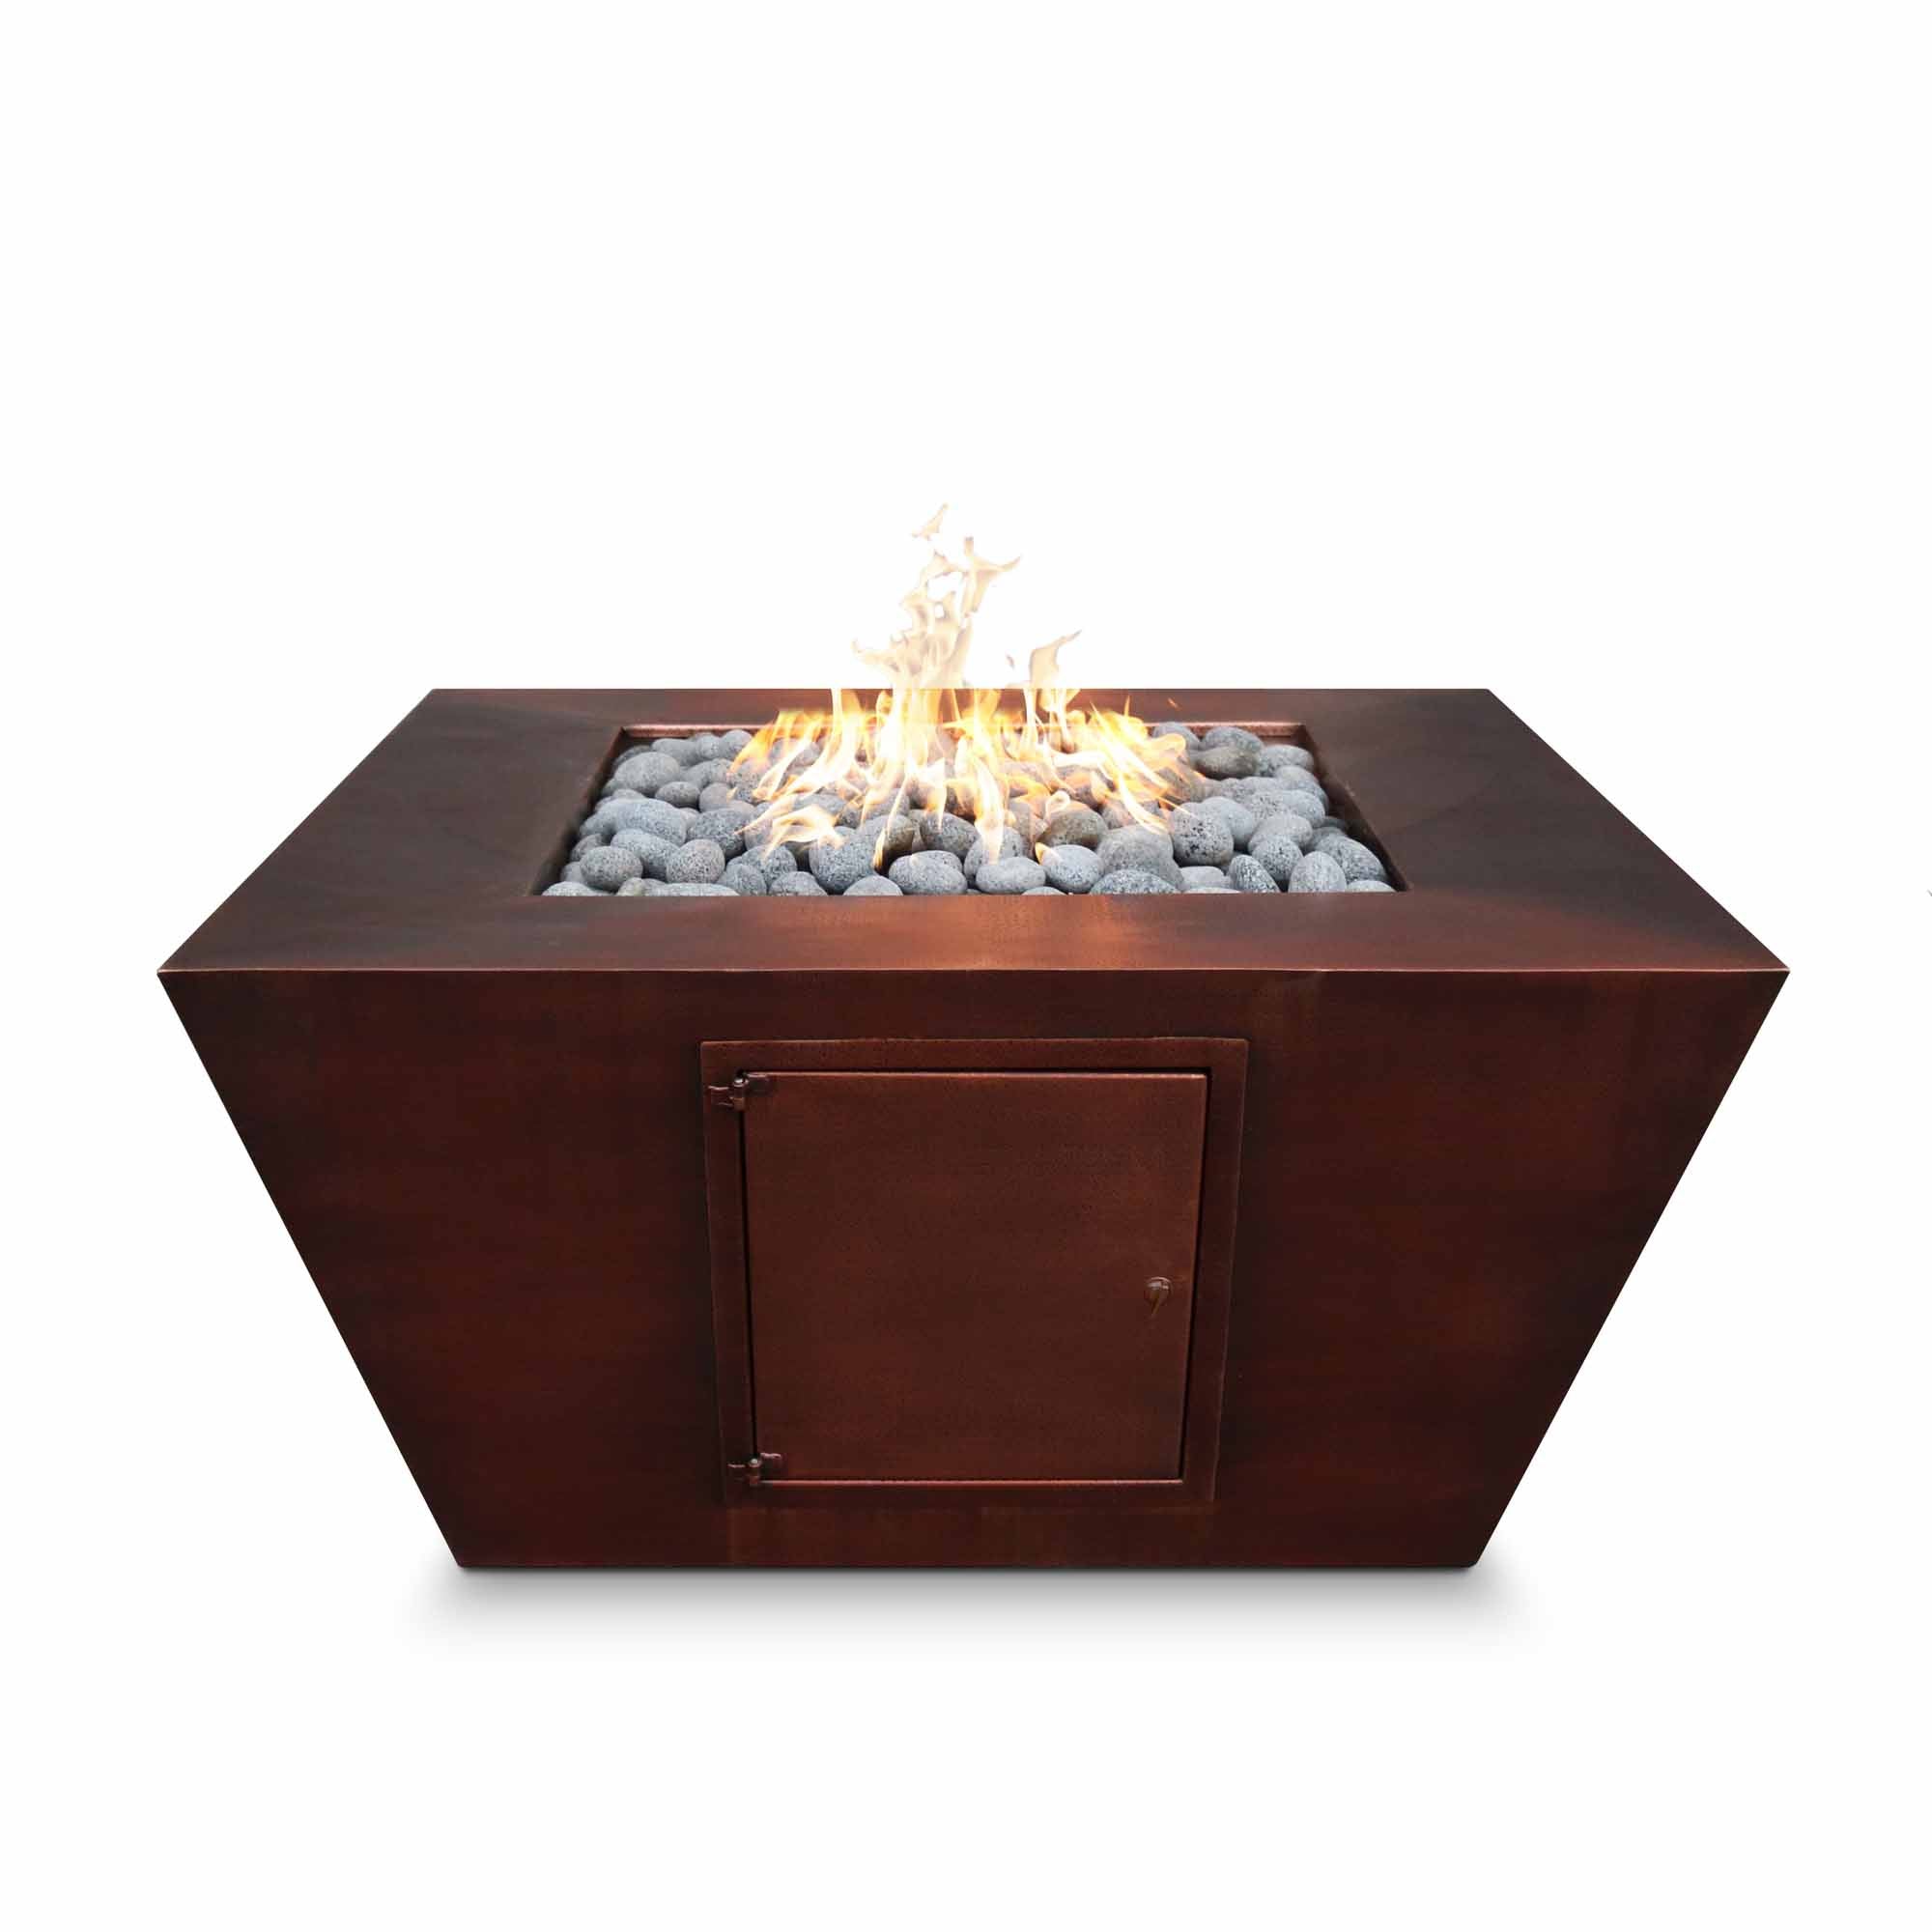 The Outdoor Plus Redan Fire Pit Hammered Copper OPT-SQXXCPM - Serenity Provision